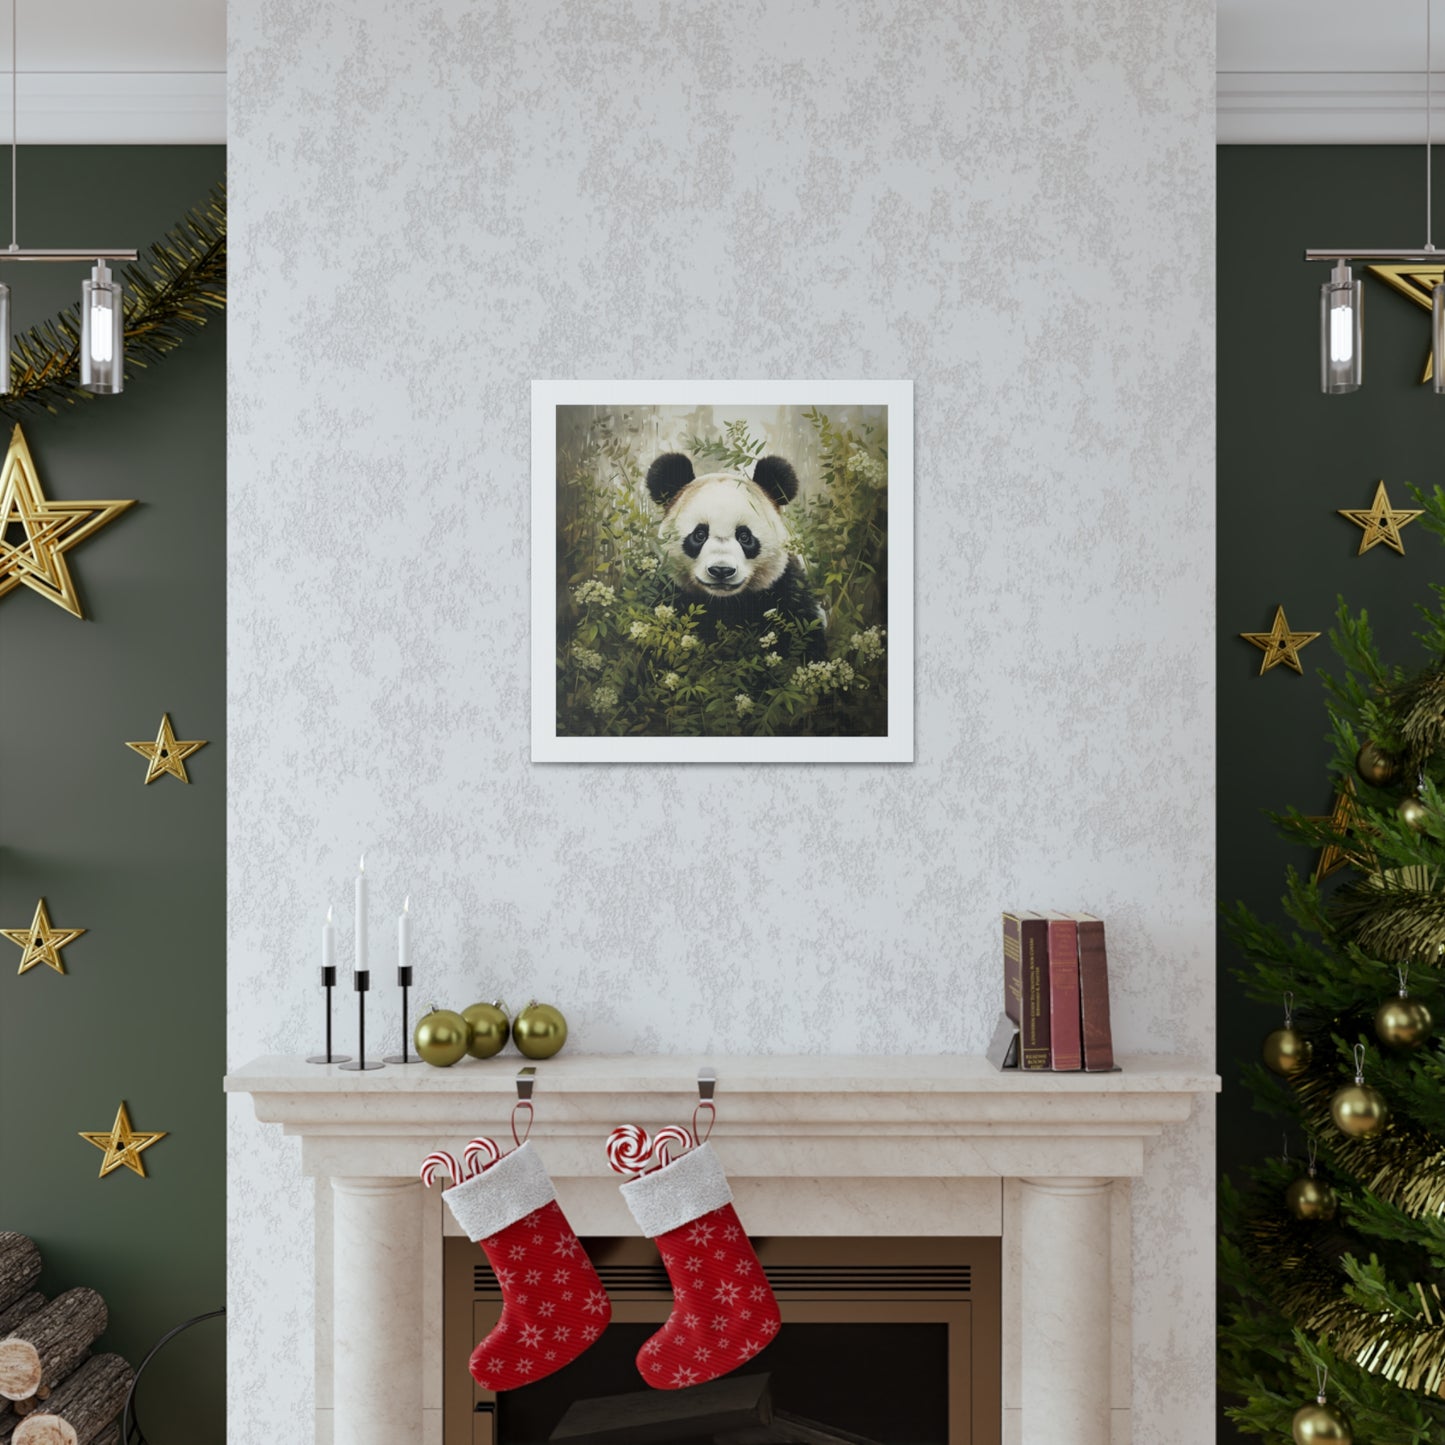 Panda Print with an Artistic Touch